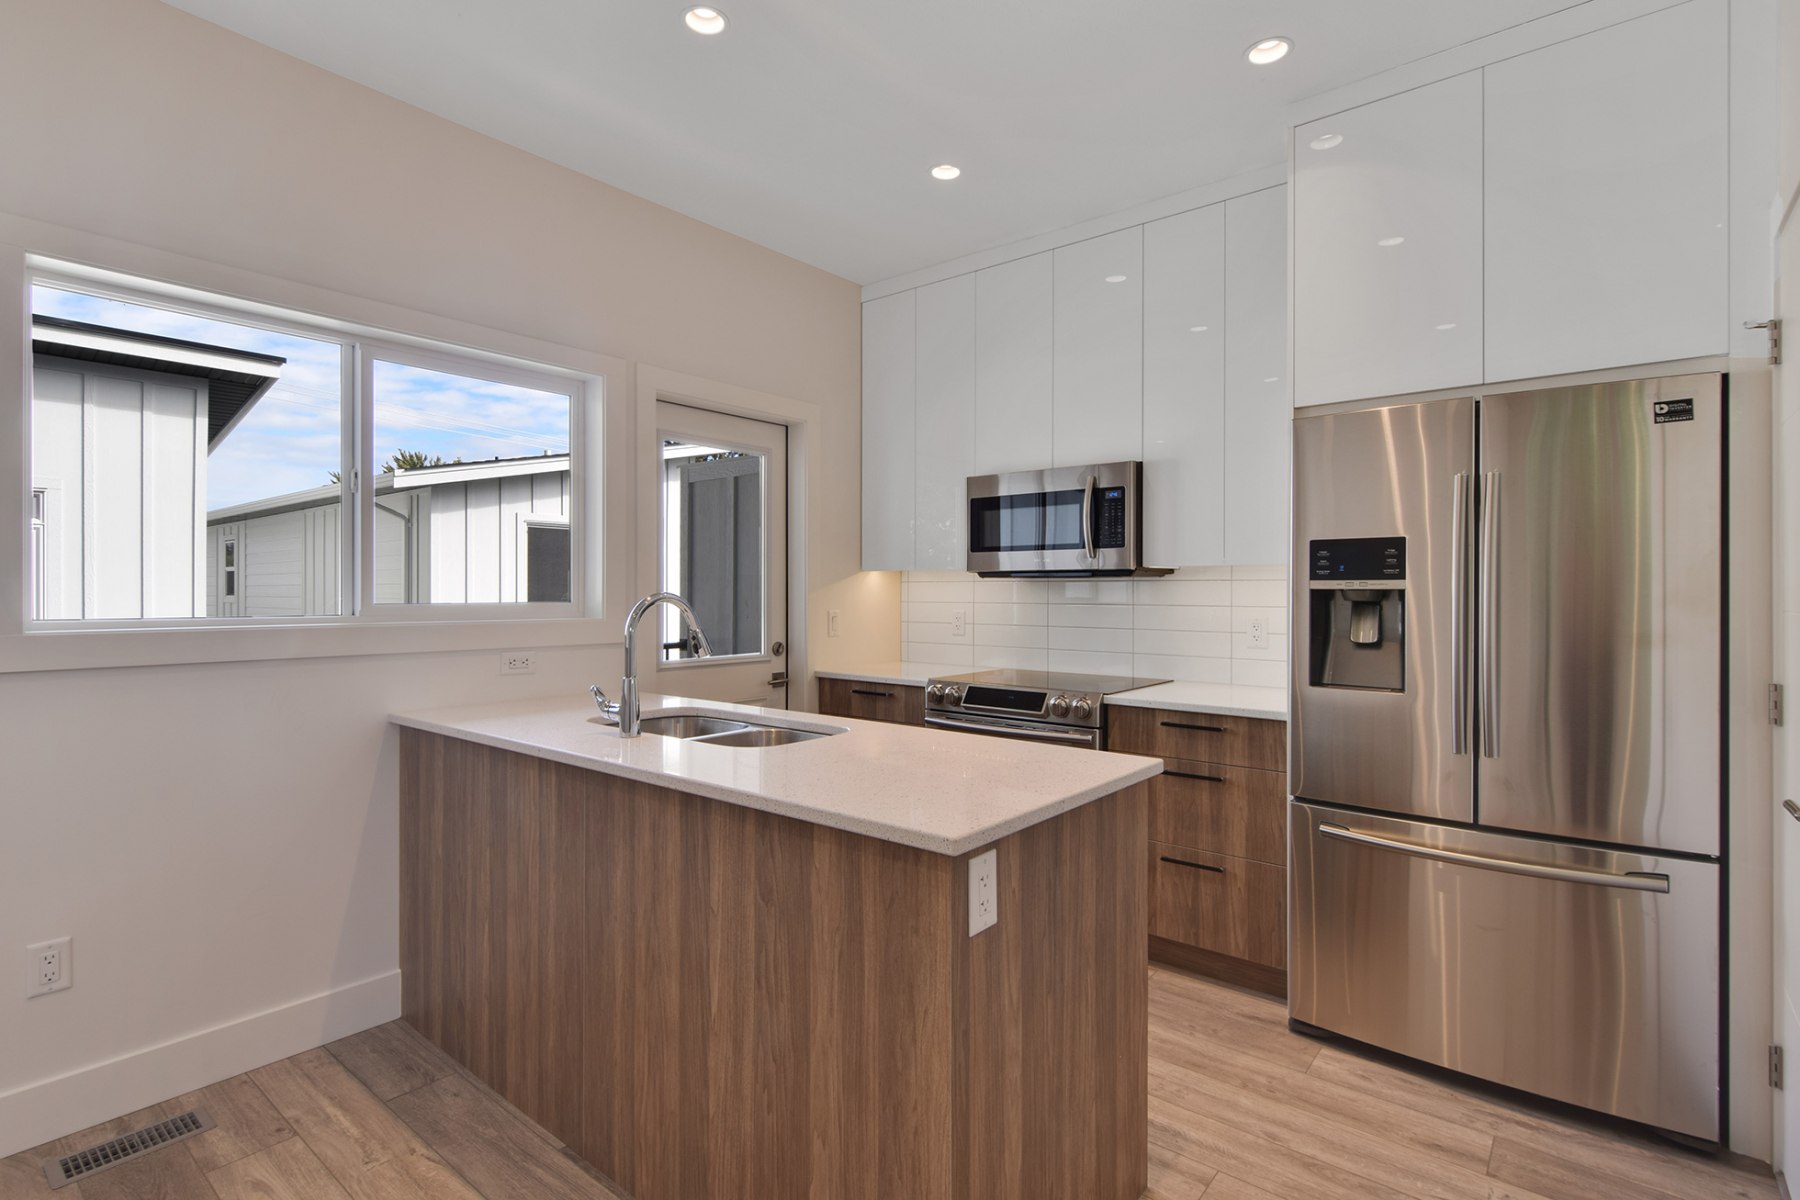 1_harmony_homes_cadder_avenue_infill_project_kitchen_area_gallery_image_14